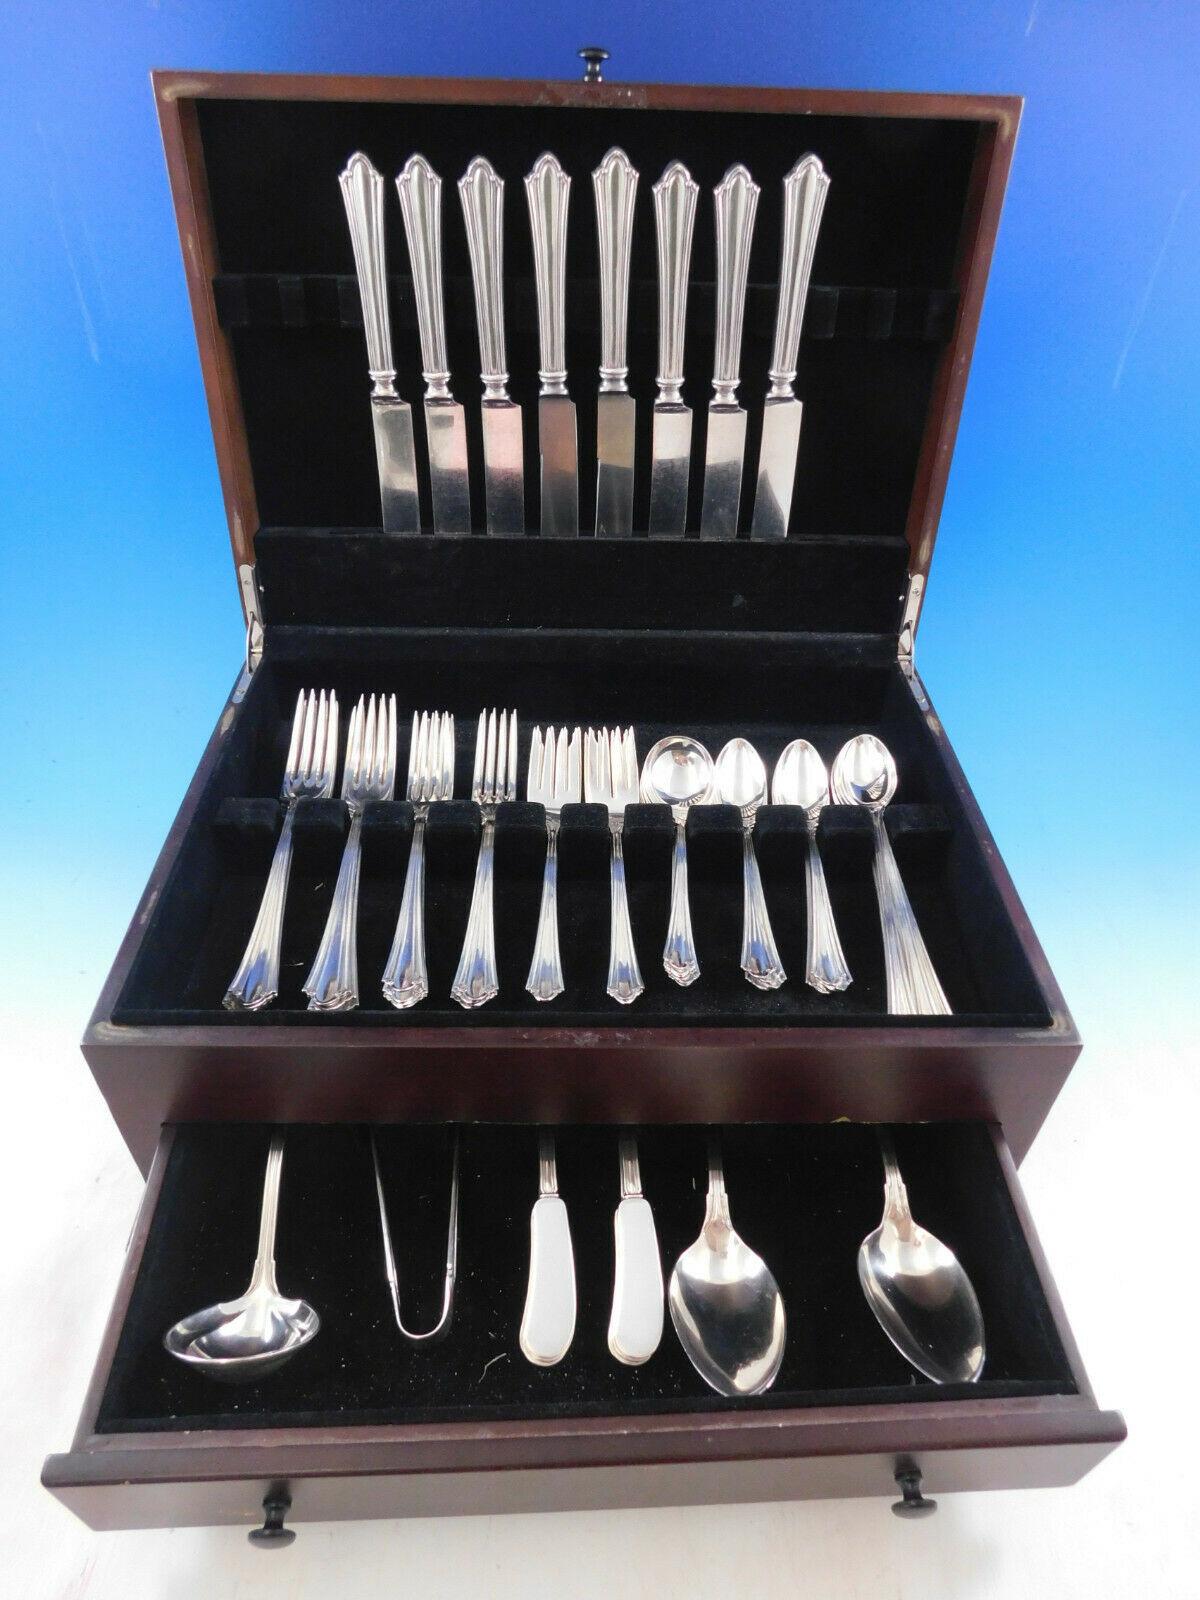 Dinner size westminster by International sterling silver flatware set - 68 pieces. This set includes:

8 dinner size knives, 9 1/2